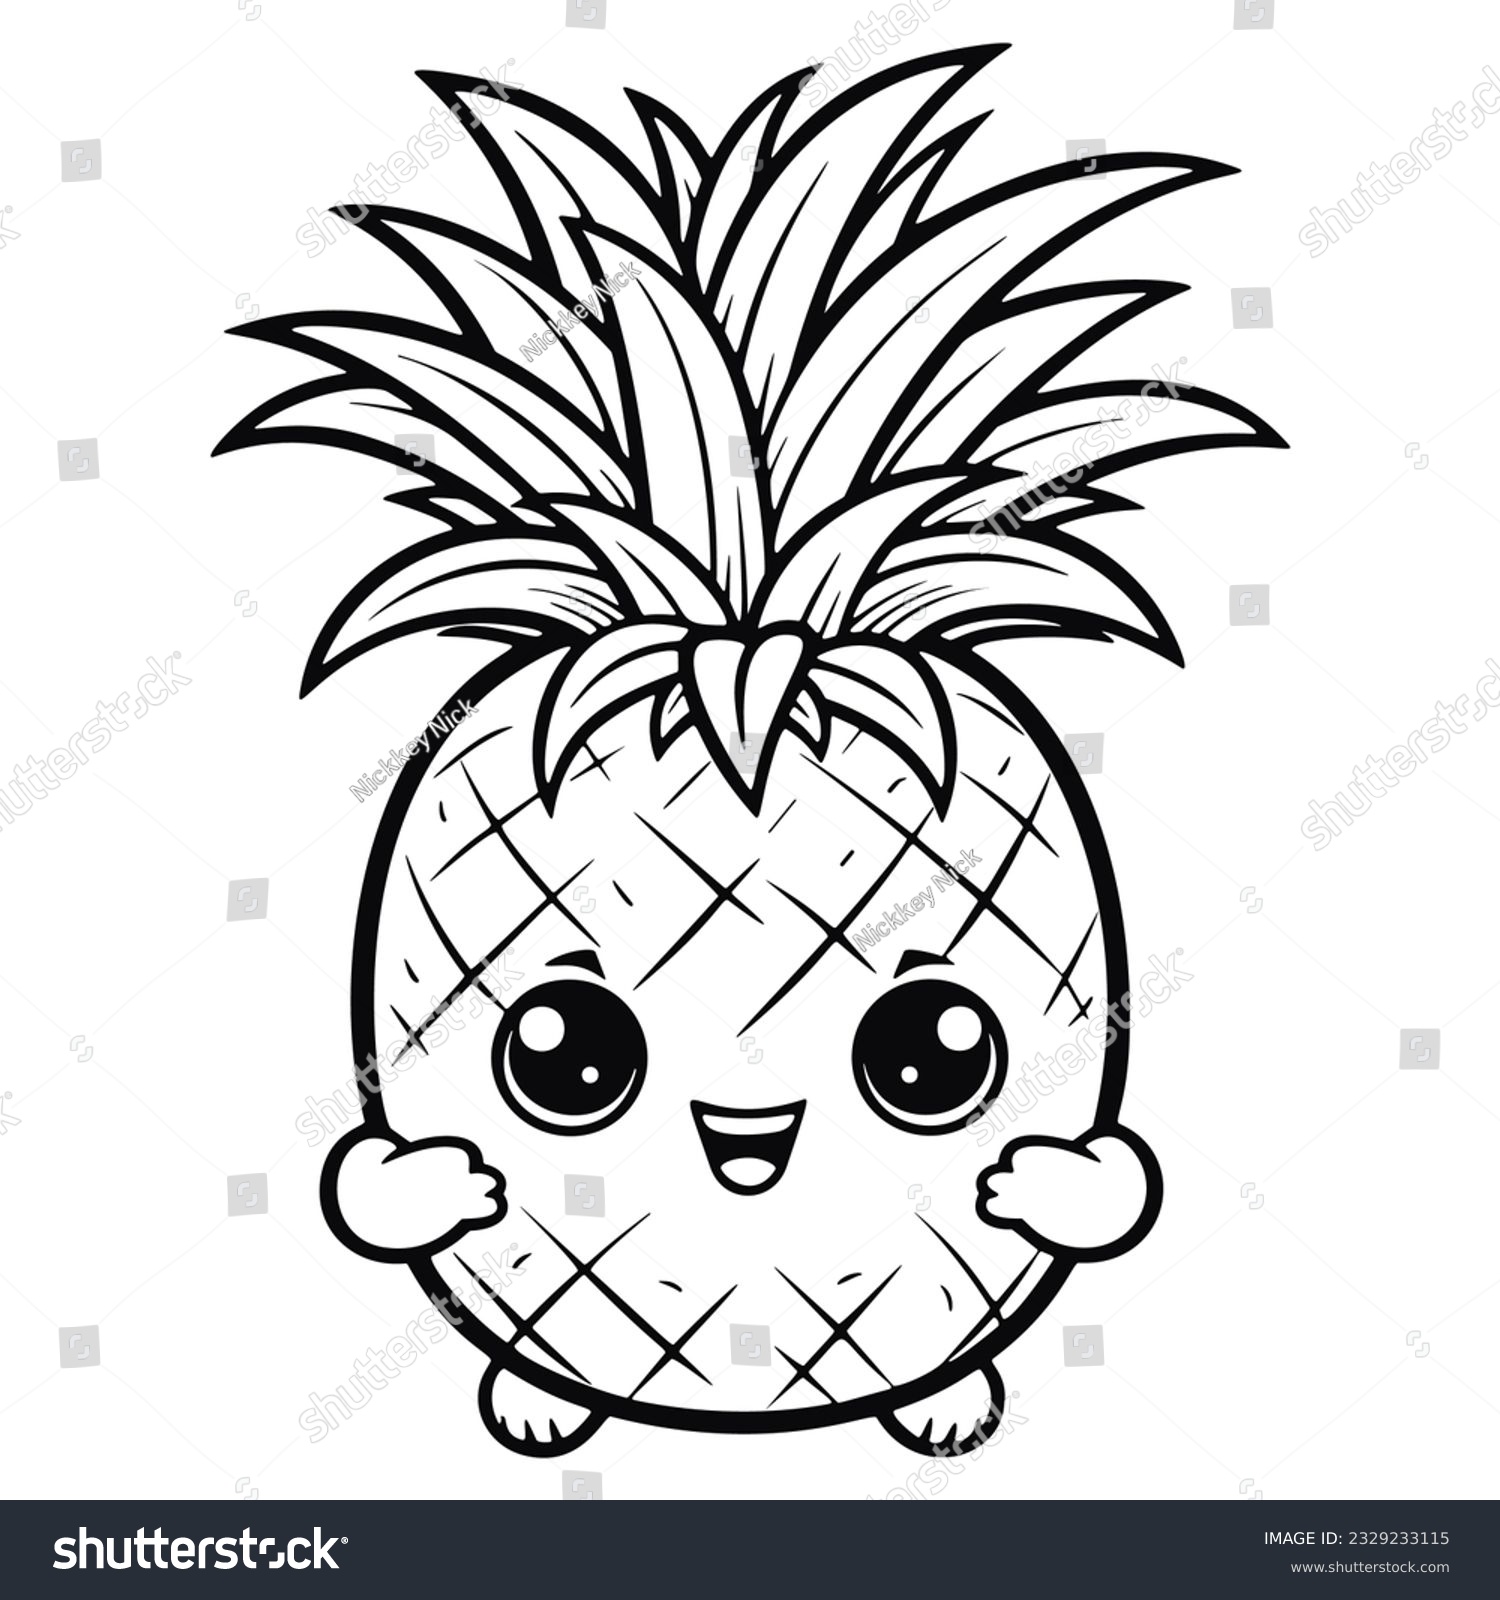 Pineapple coloring book images stock photos d objects vectors